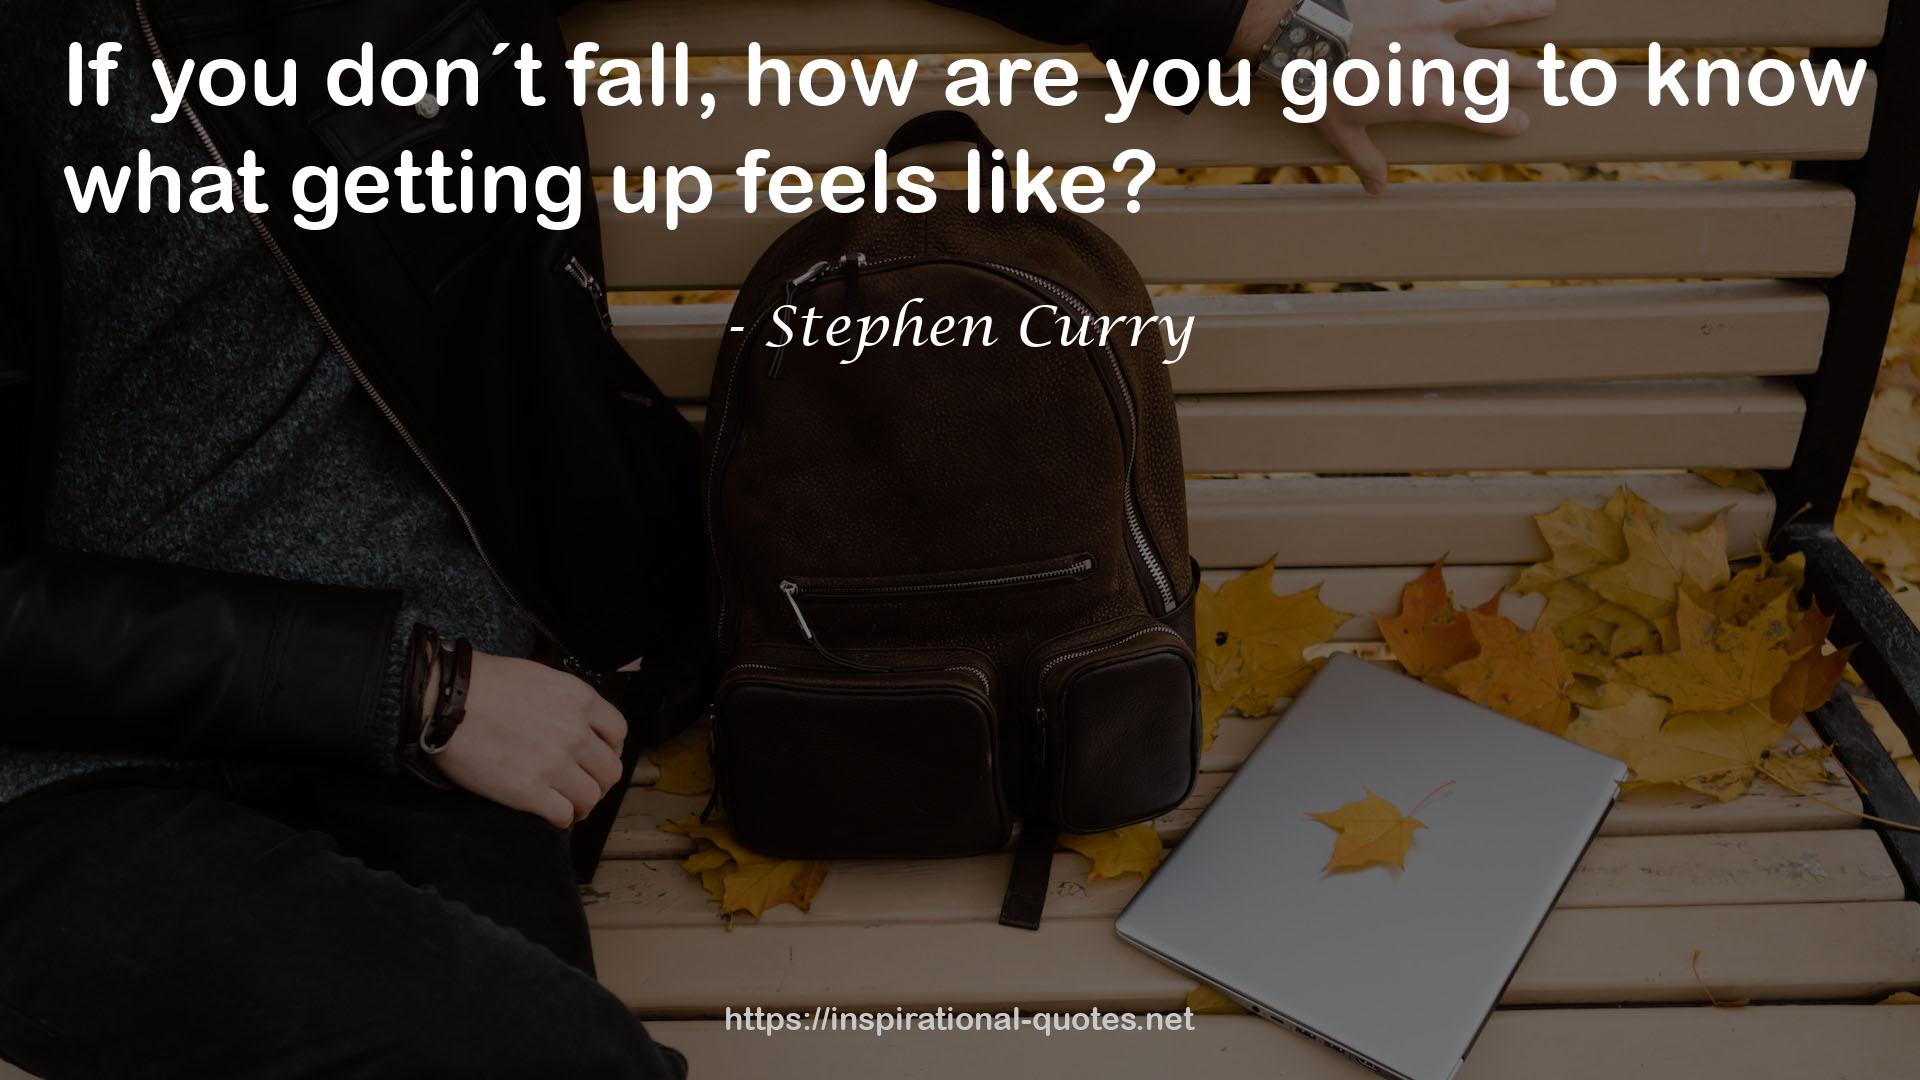 Stephen Curry QUOTES